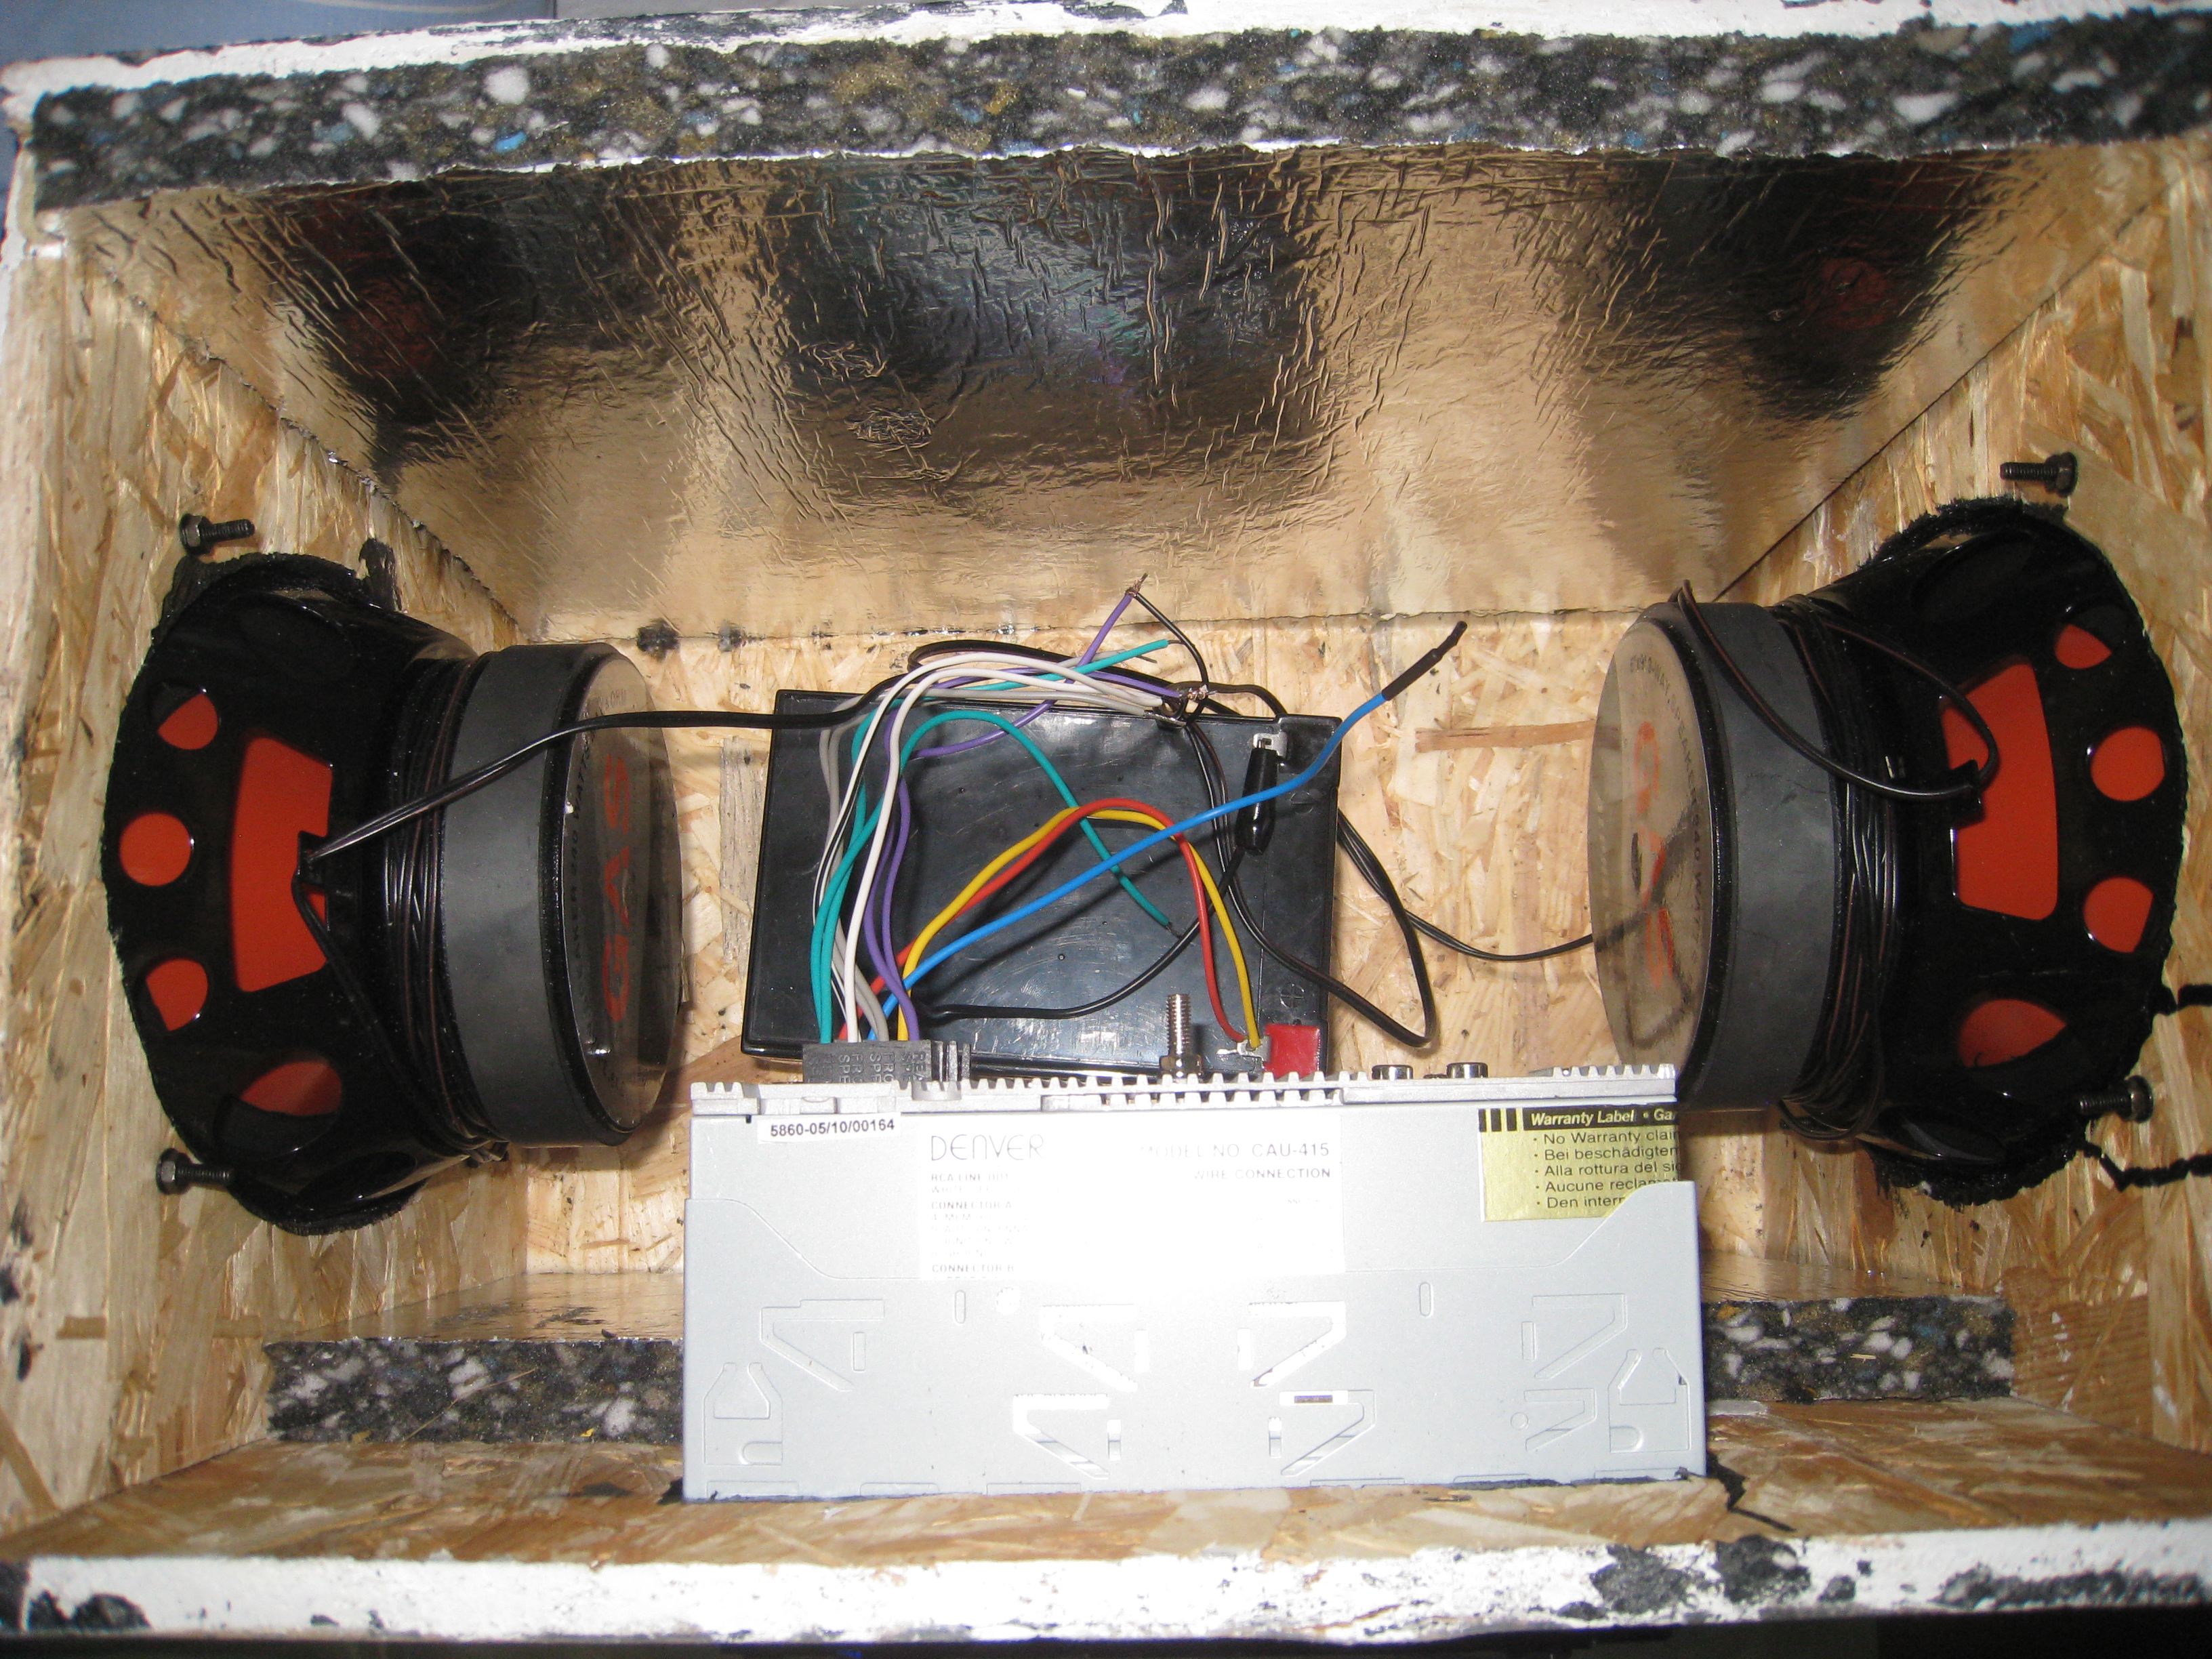 Interior picture of boombox